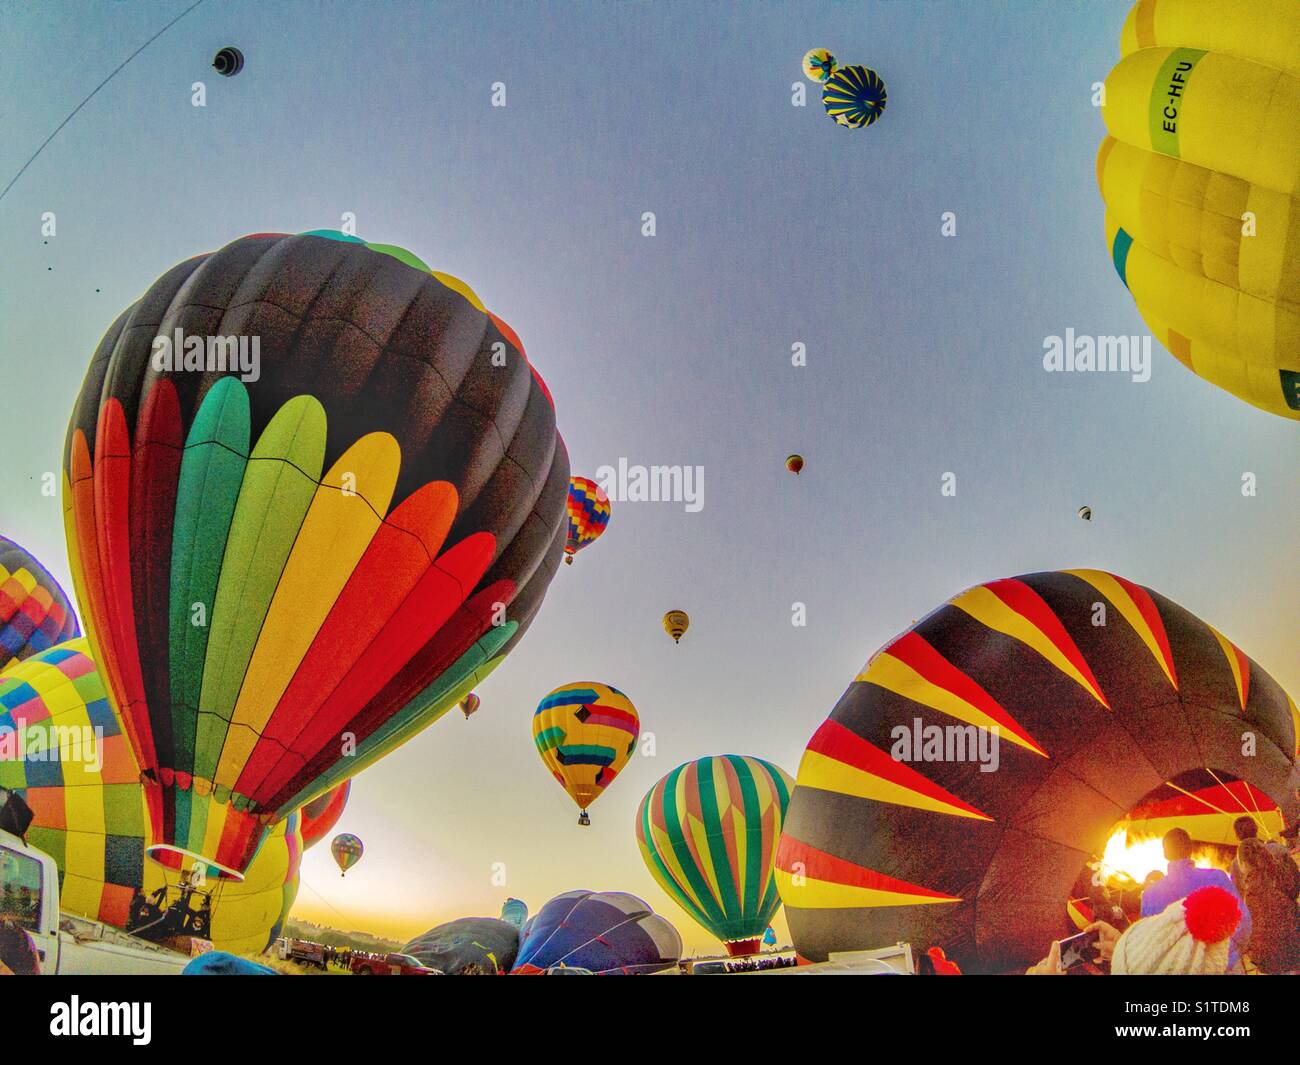 Hot air balloon festival Leon in Mexico day time Stock Photo